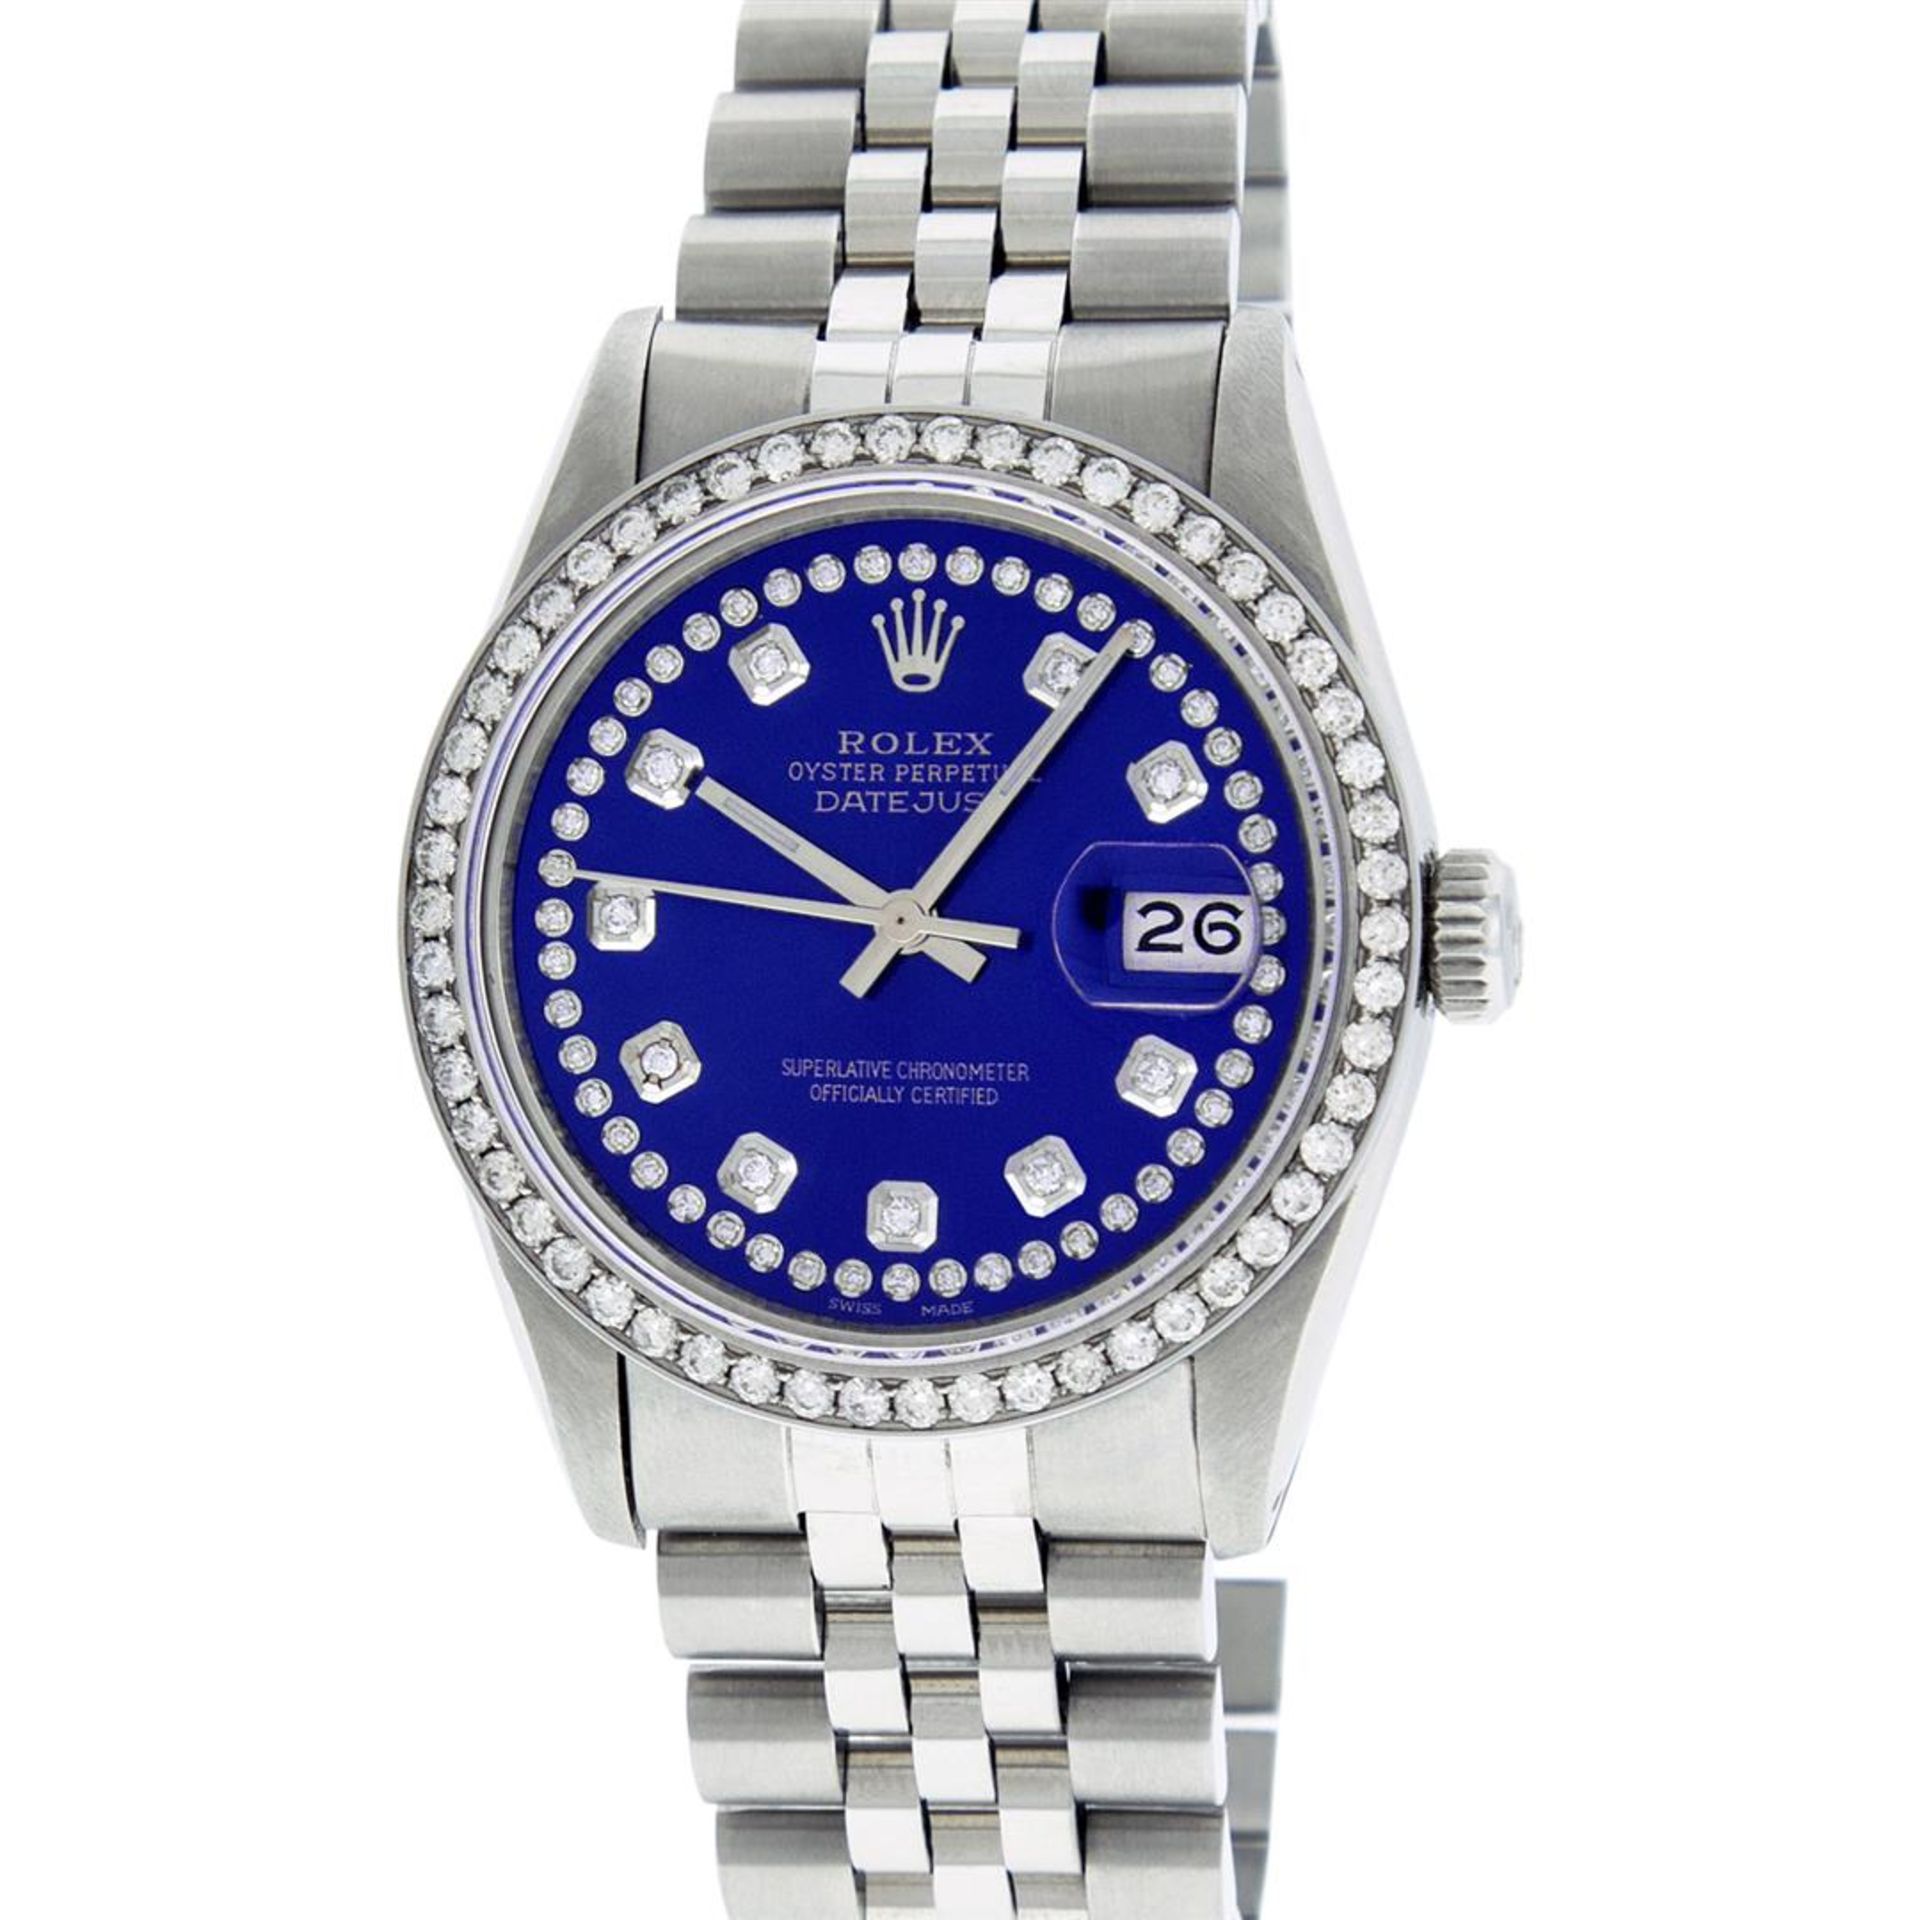 Rolex Stainless Steel Blue String Diamond 36MM Oyster Perpetual Datejust Wristwa - Image 2 of 9